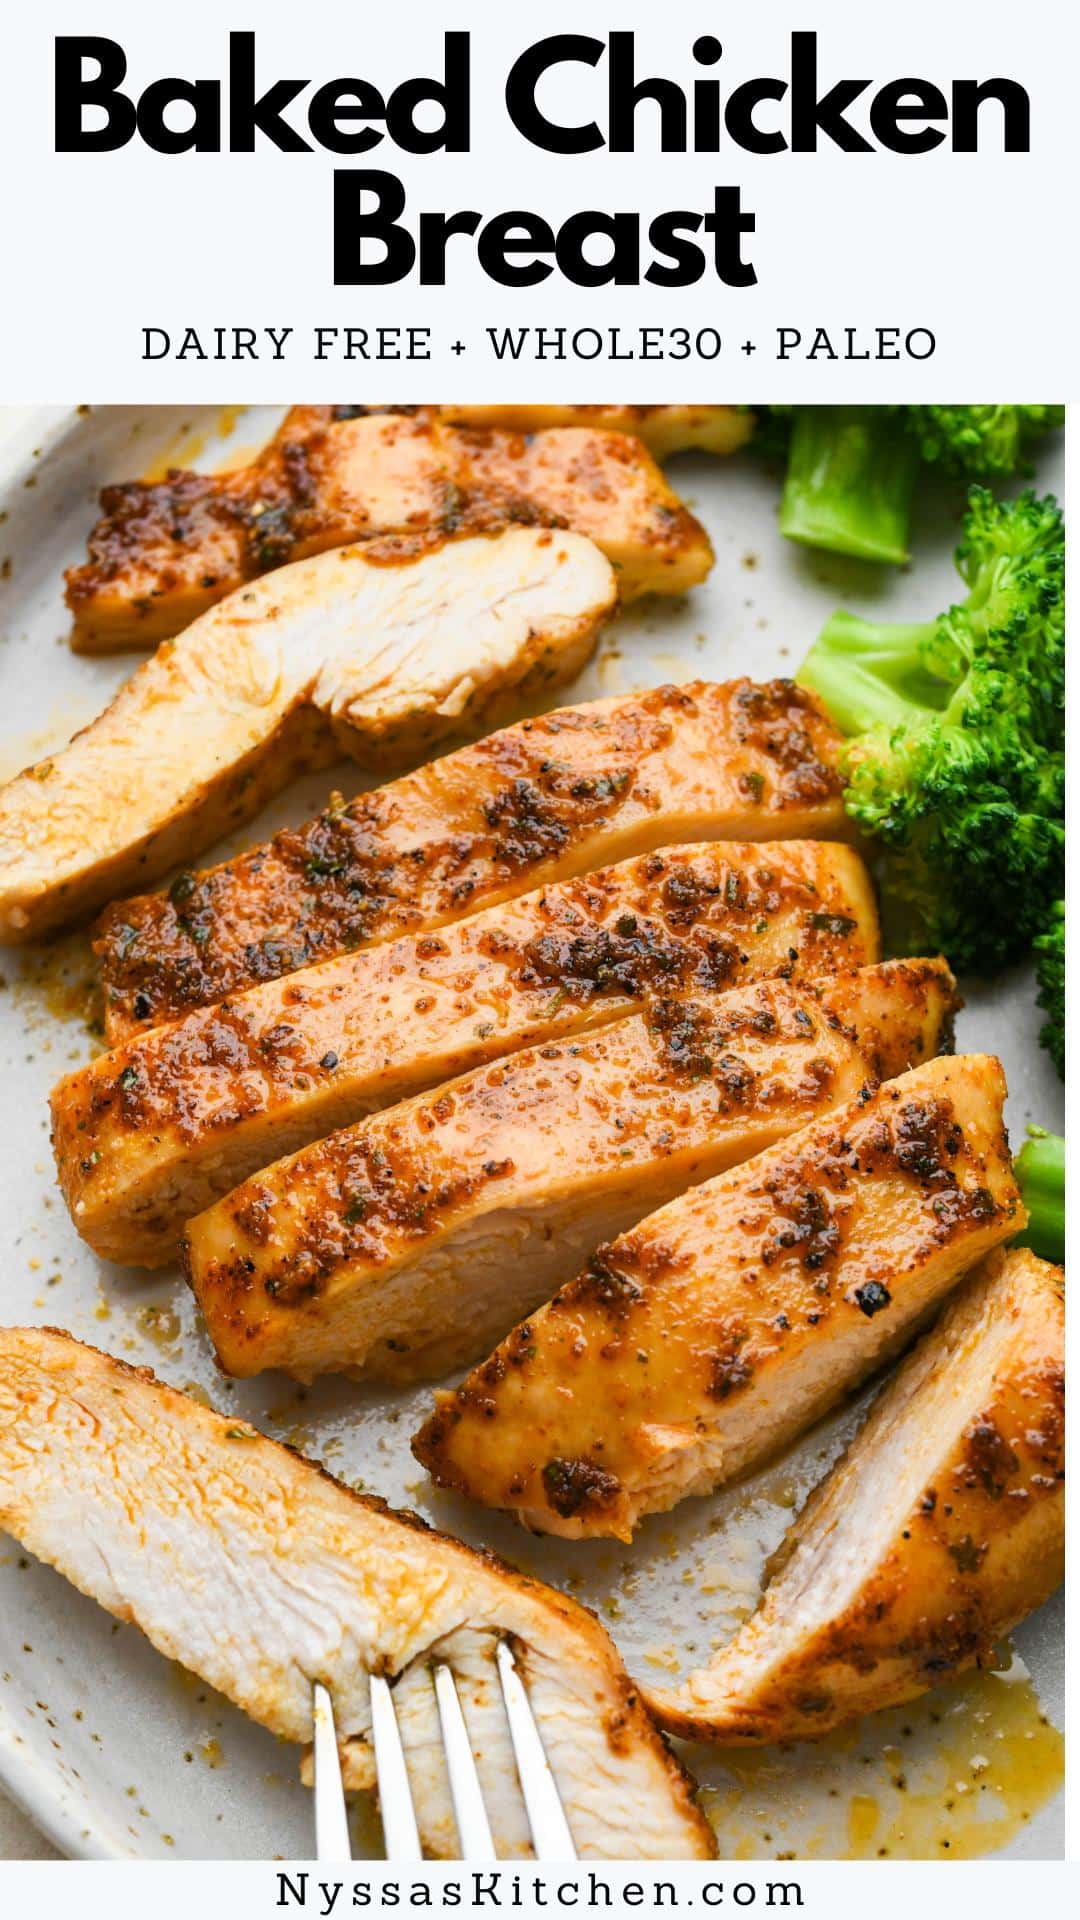 This baked chicken breast recipe is an absolute staple for healthy meal prep! Not only are they super easy to make, but the chicken breasts come out perfect every time - juicy, moist, and incredibly flavorful. Say goodbye to dry, bland chicken for good! Ready in less than 30 minutes and gluten free, dairy free, paleo, Whole30, and keto friendly.